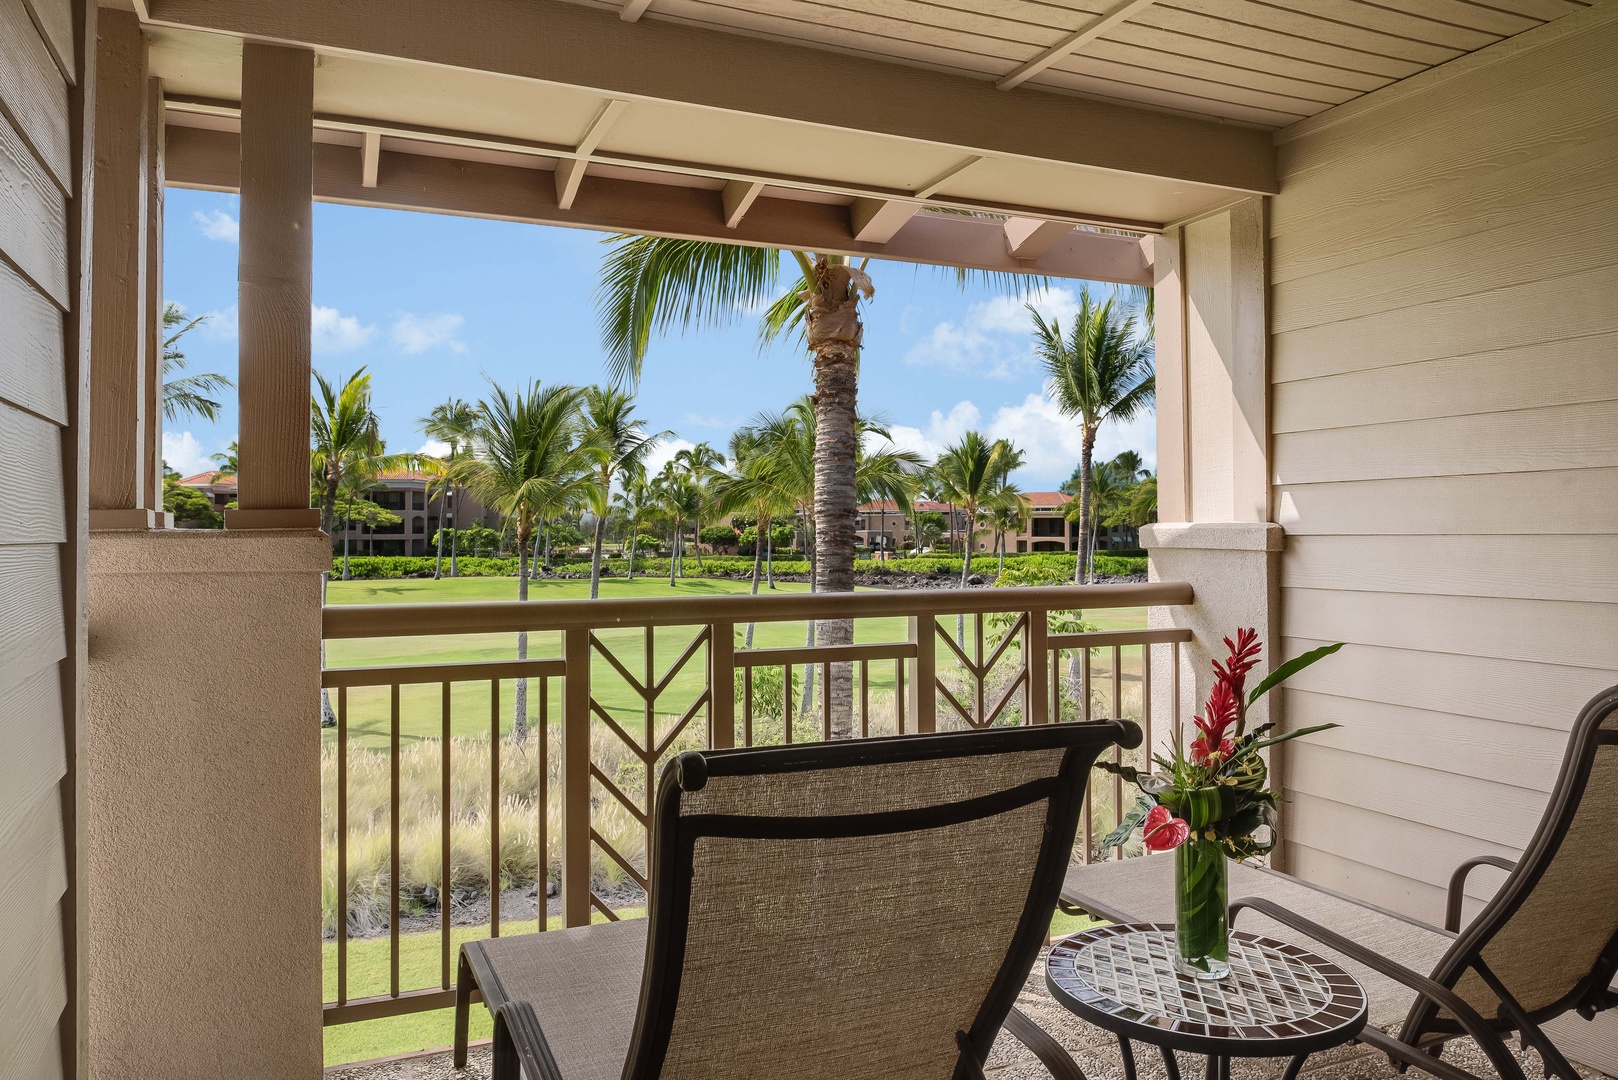 Waikoloa Vacation Rentals, Waikoloa Colony Villas 403 - Relax on Your Private Lanai Off the Primary Bedroom w/ Serene Golf Course Views.